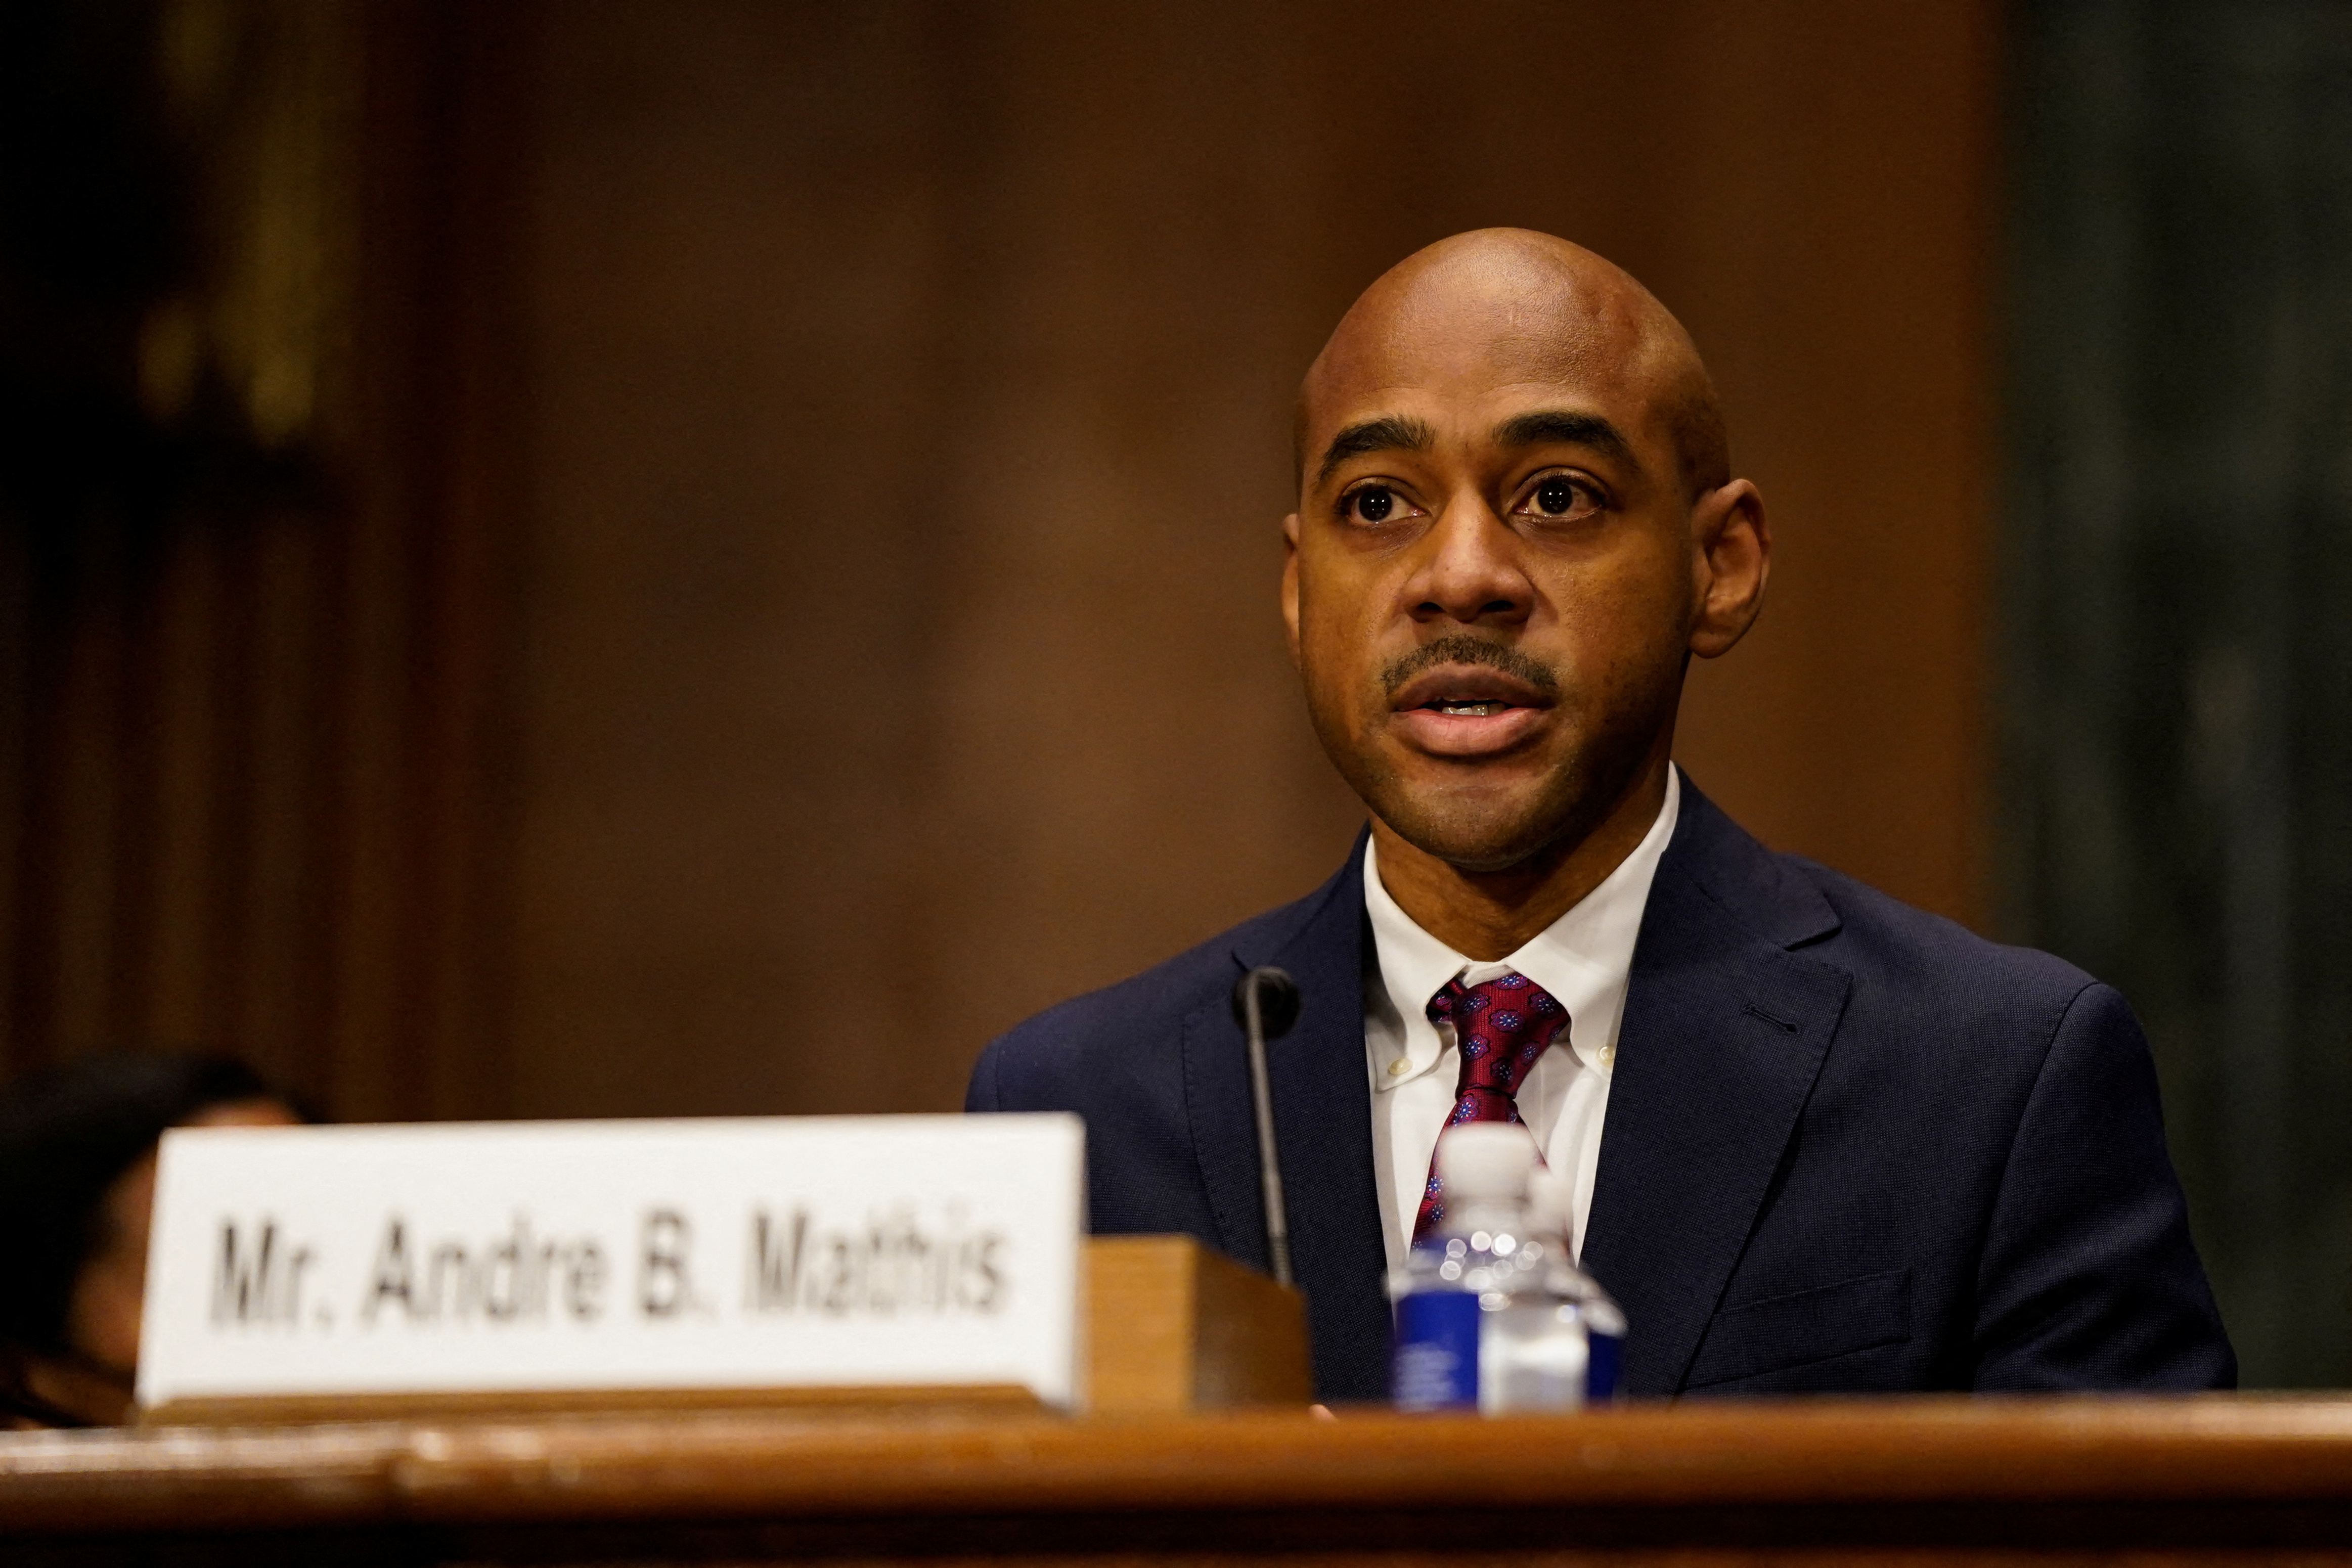 Andre Mathis, a nominee to the 6th U.S. Circuit Court of Appeals, testifies during a U.S. Senate Judiciary Committee hearing on Capitol Hill in Washington, U.S., January 12, 2022. REUTERS/Elizabeth Frantz